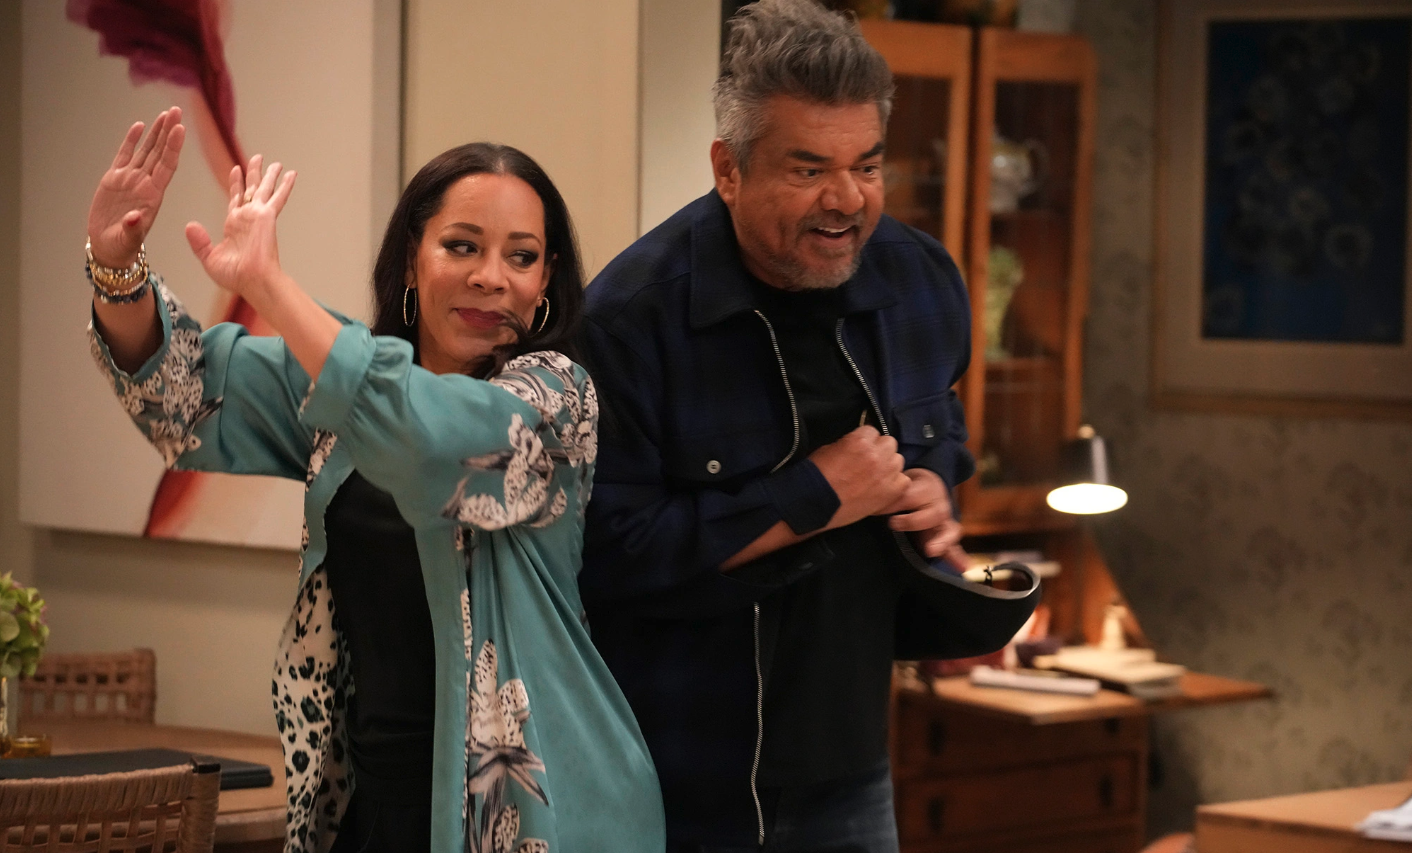 George Lopez and Selenis Leyva from Lopez vs Lopez